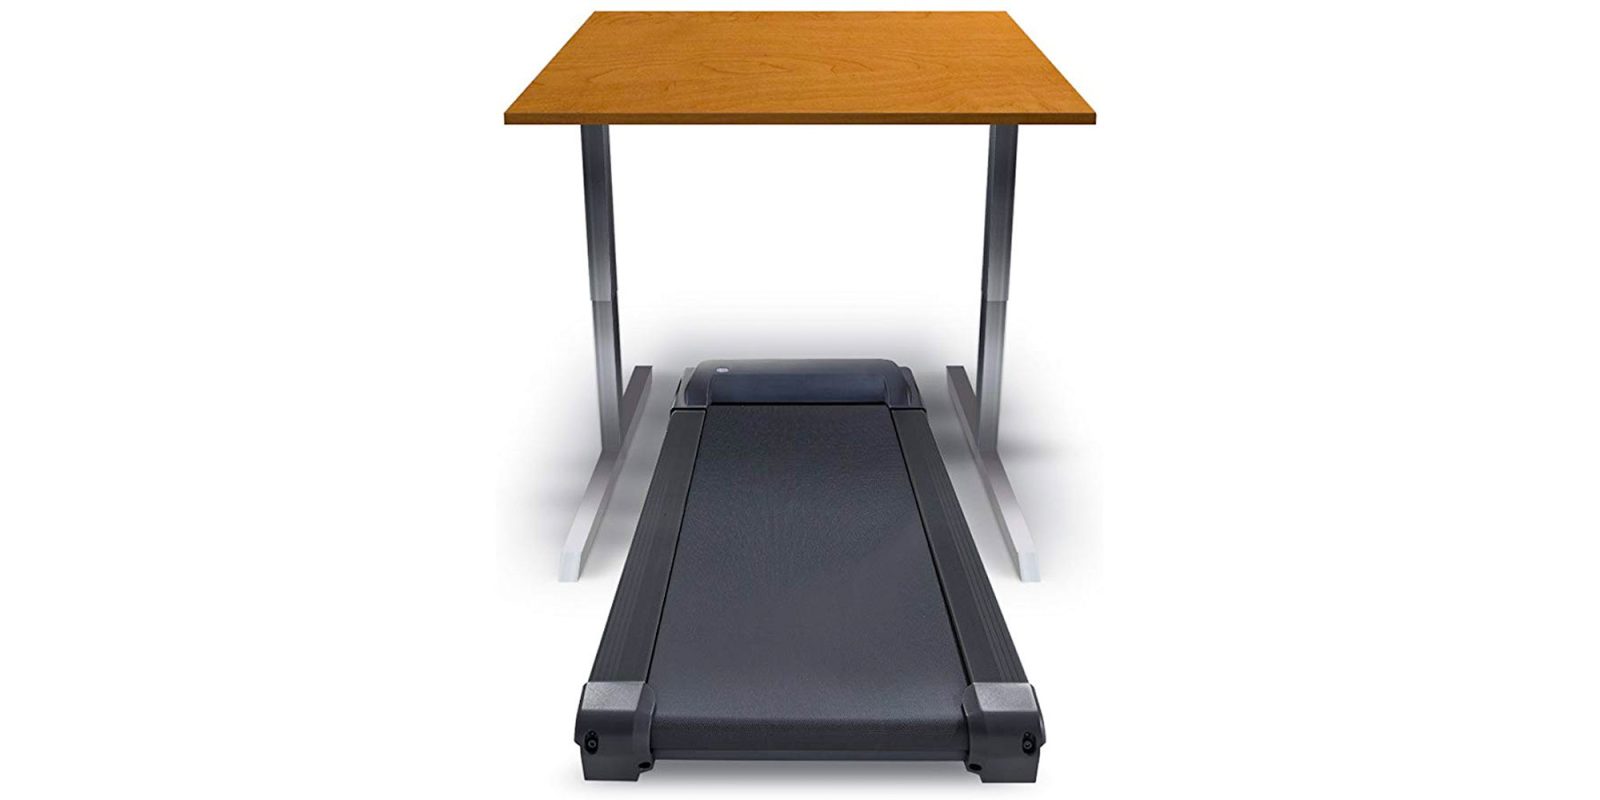 Stay Fit With This Treadmill That Goes Under Your Desk 677 Reg